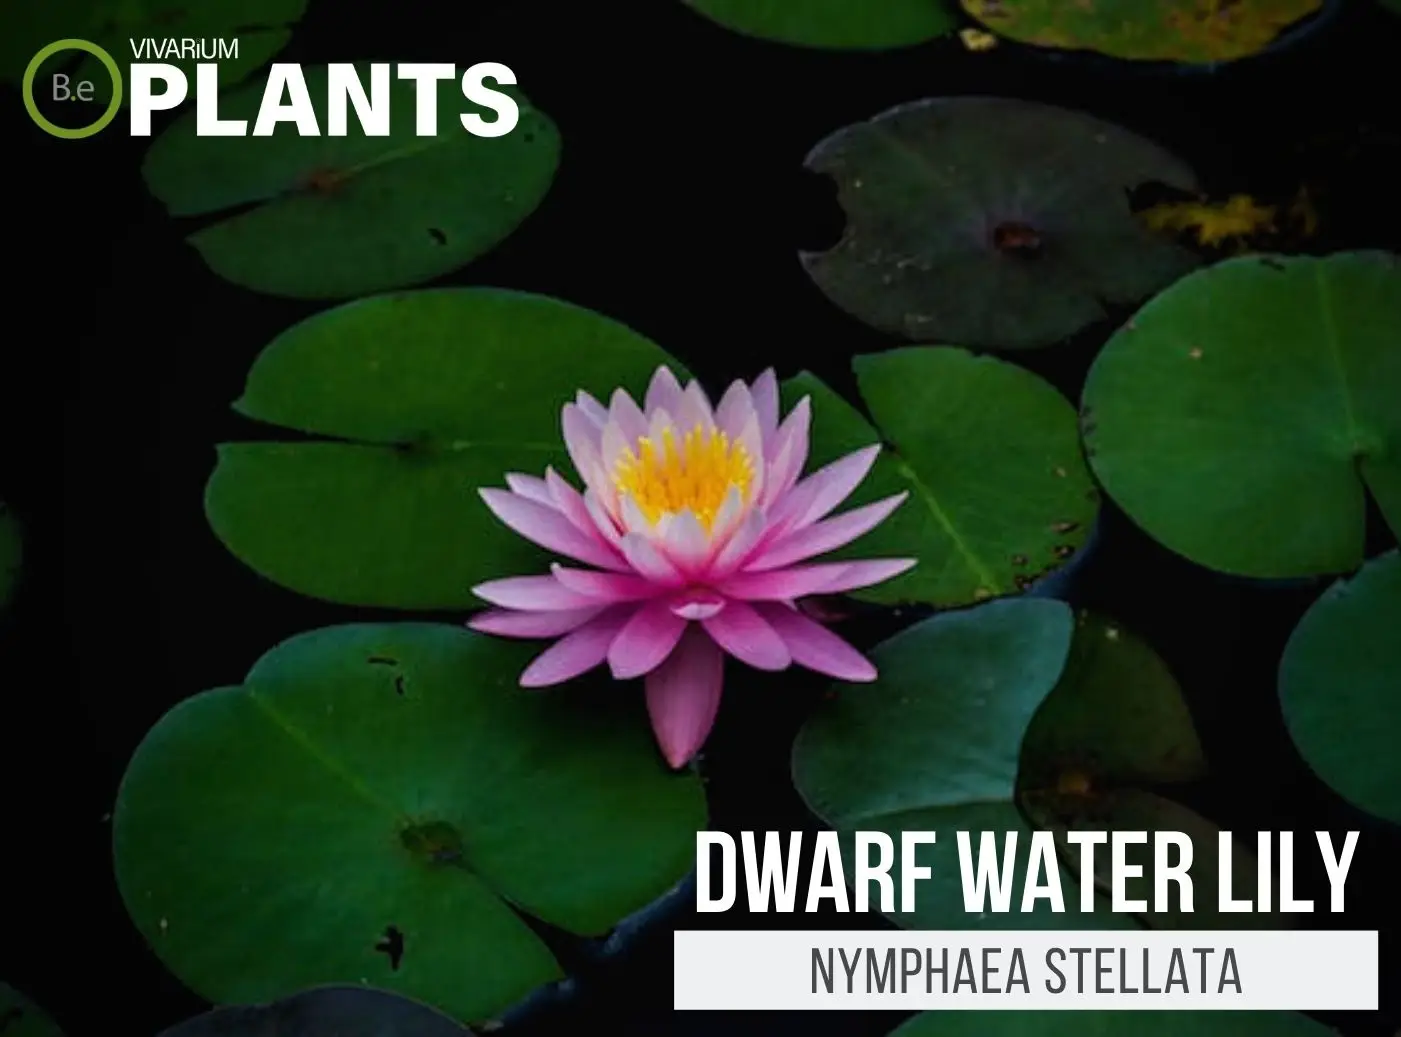 Nymphaea stellata "Dwarf Water Lily" Plant Care Guide